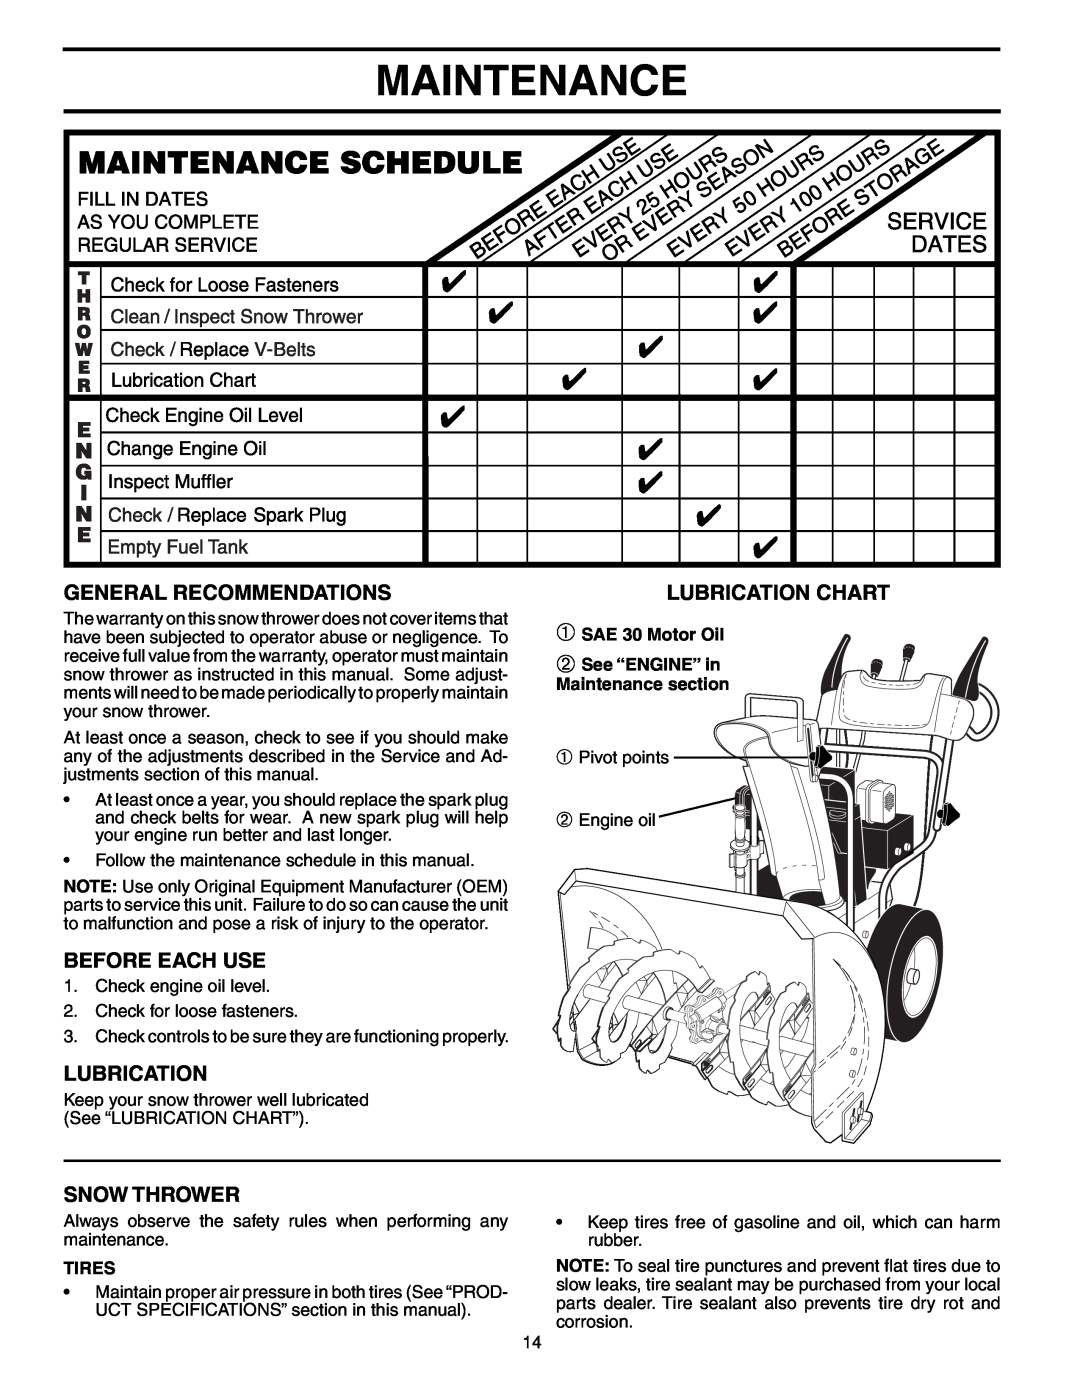 Poulan 192034 Maintenance, General Recommendations, Before Each Use, Snow Thrower, Lubrication Chart, Tires 